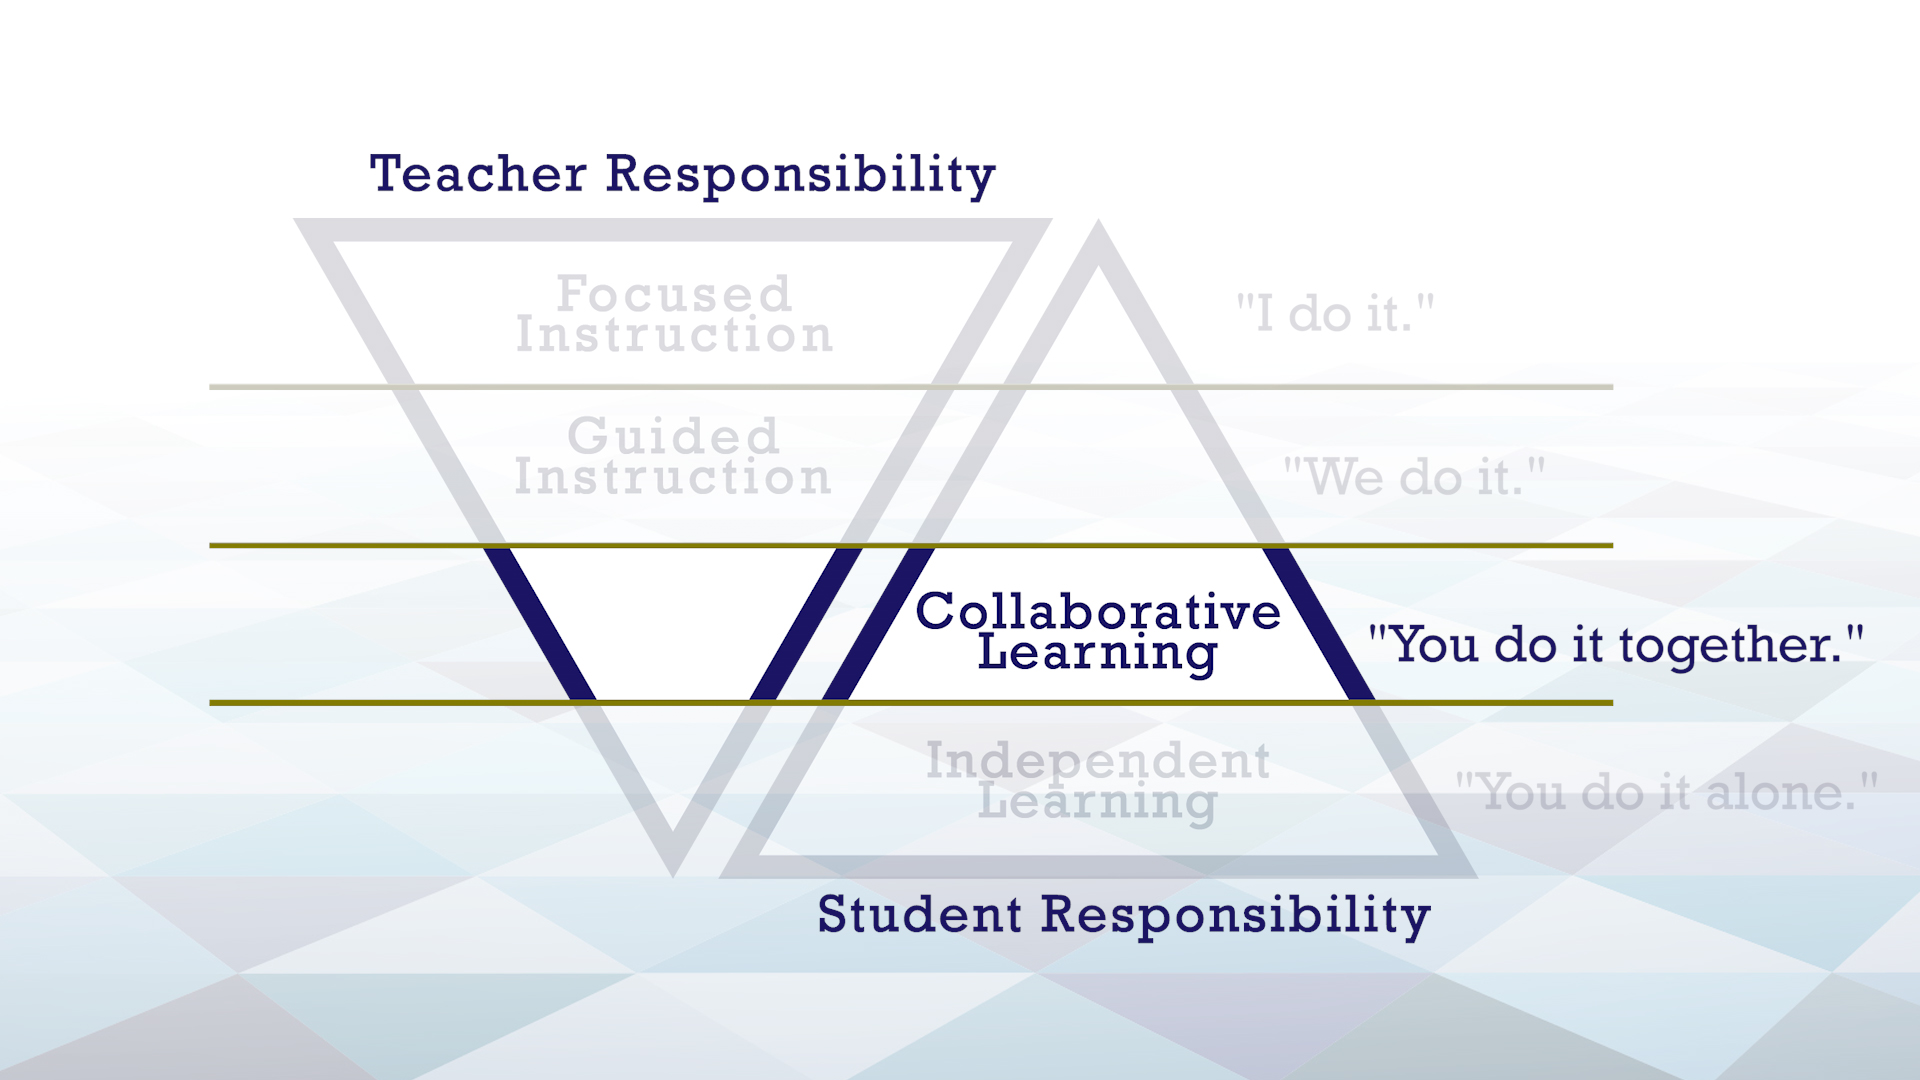 GRR image of two triangles side by side, one inverted, with the Collaborative Learning section highlighted